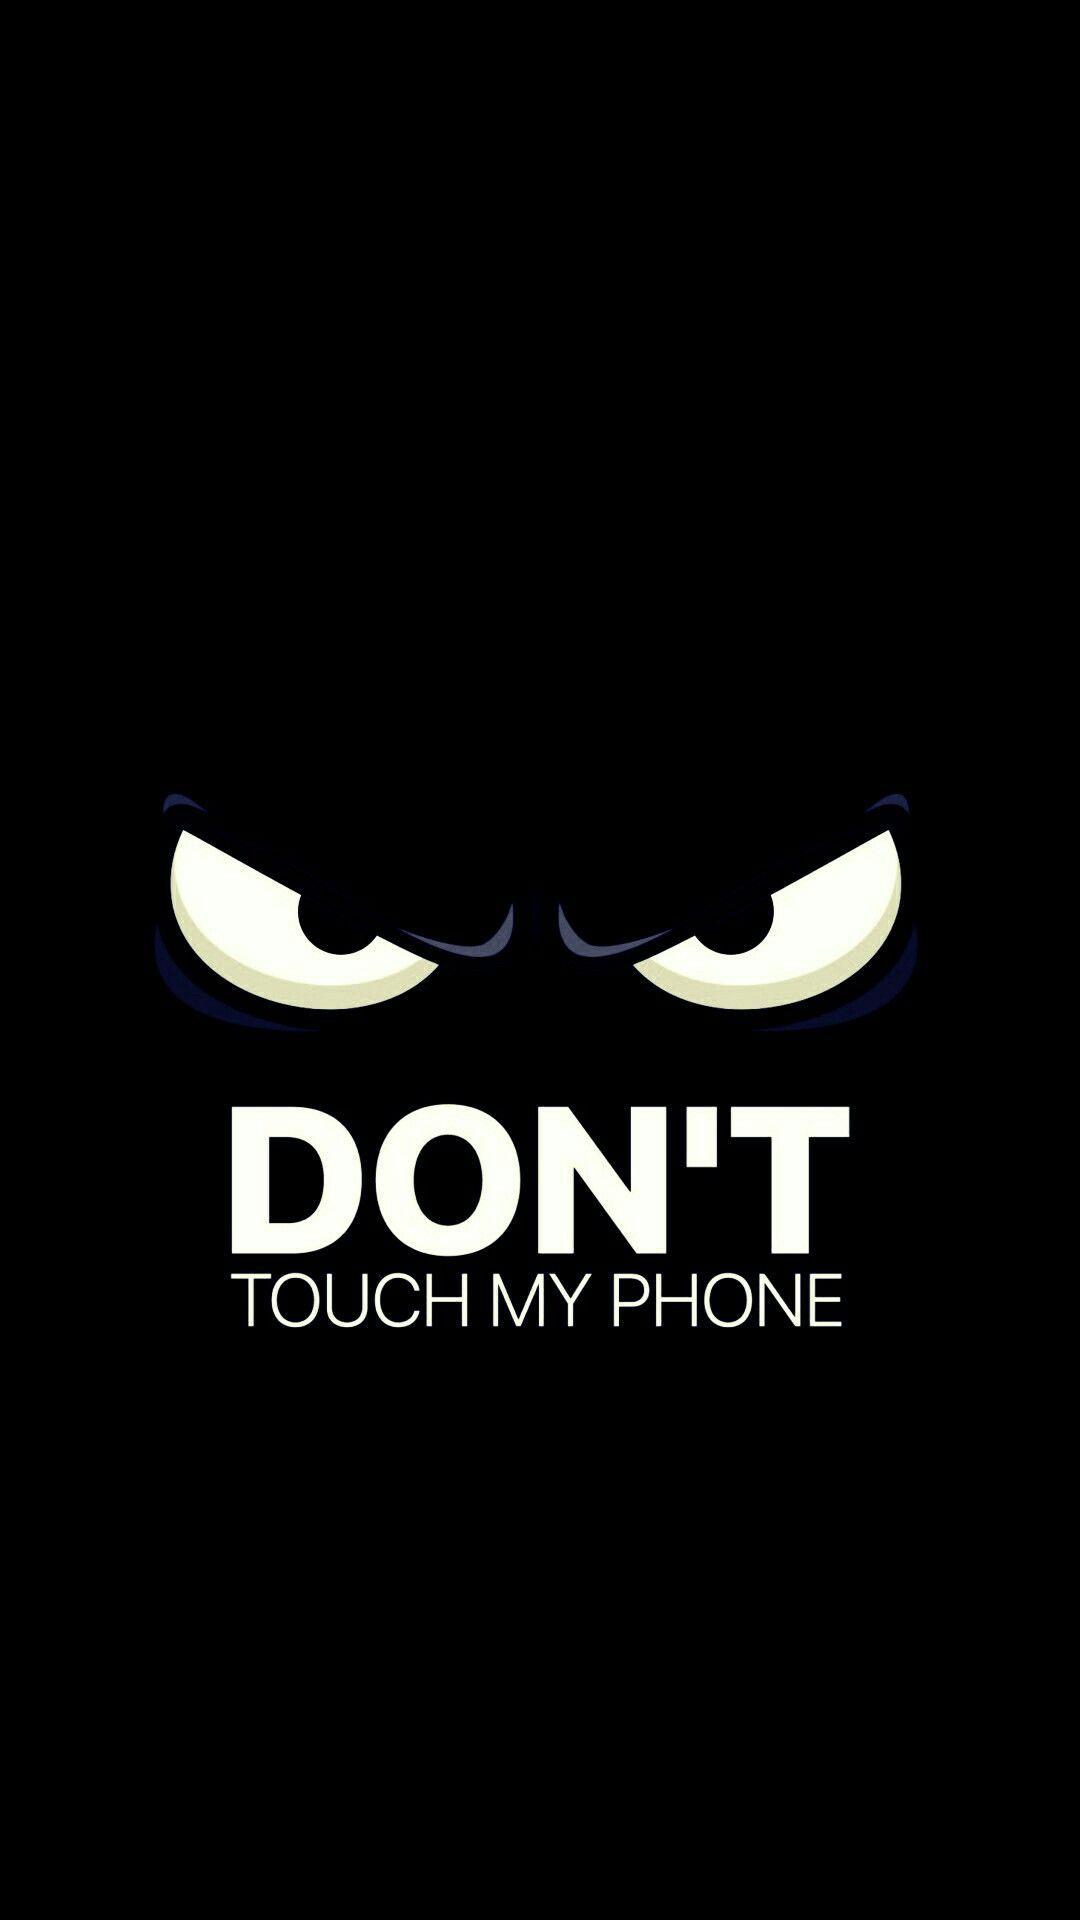 Don't Touch My Phone. Dont touch my phone wallpaper, Funny phone wallpaper, Don't touch my phone wallpaper